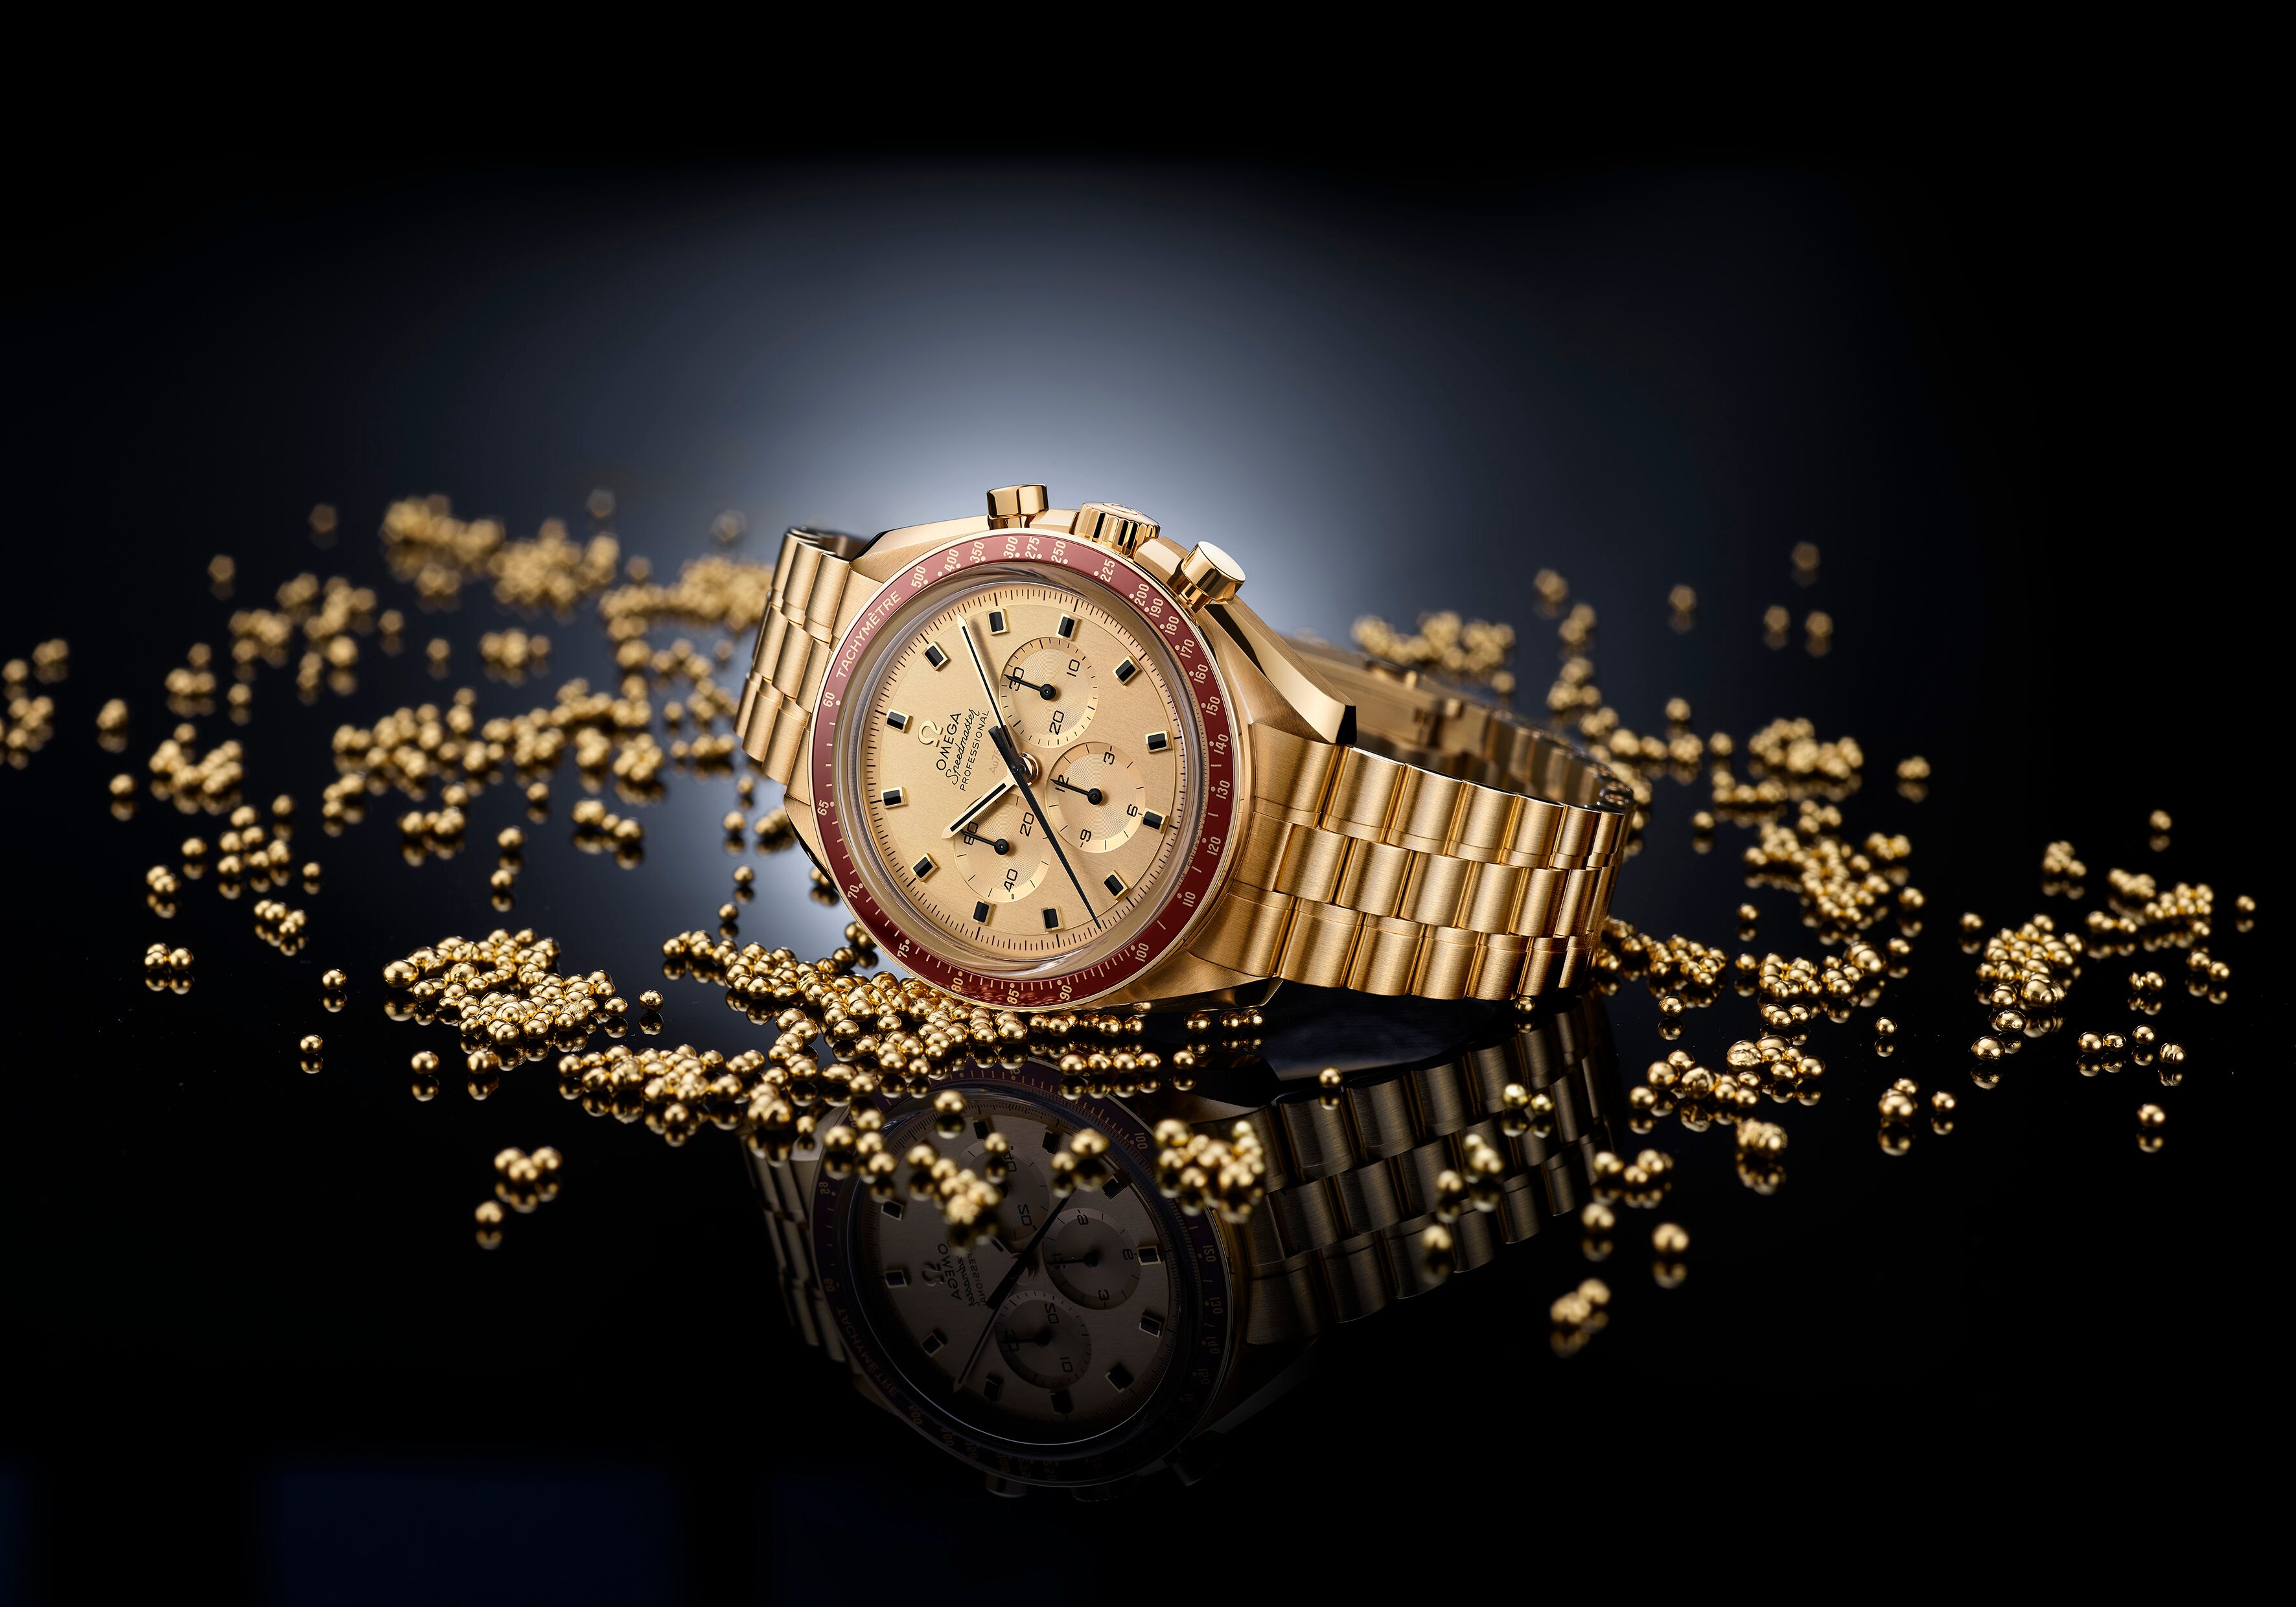 Omega Speedmaster: The Golden Anniversary Of The First Watch Worn On The Moon